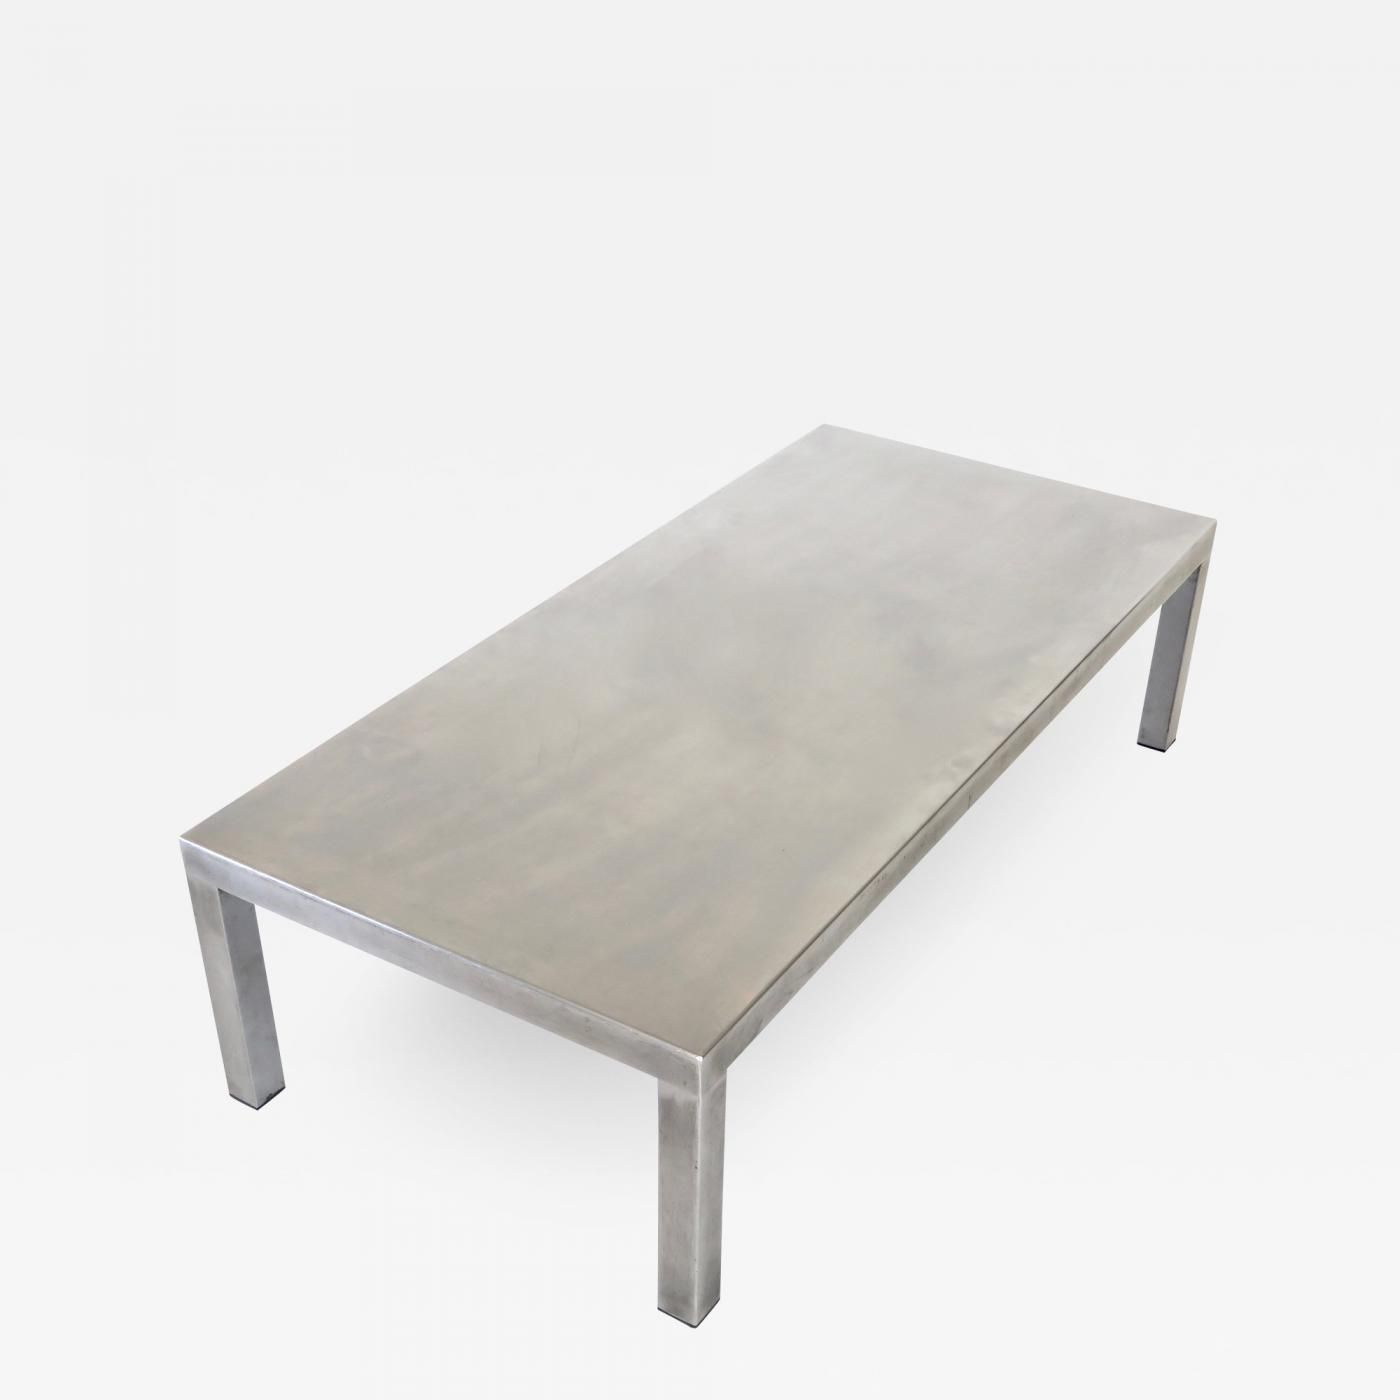 Maria Pergay – Maria Pergay Created With Marina Varenne Brushed Stainless  Steel Coffee Table With Brushed Stainless Steel Coffee Tables (View 13 of 20)